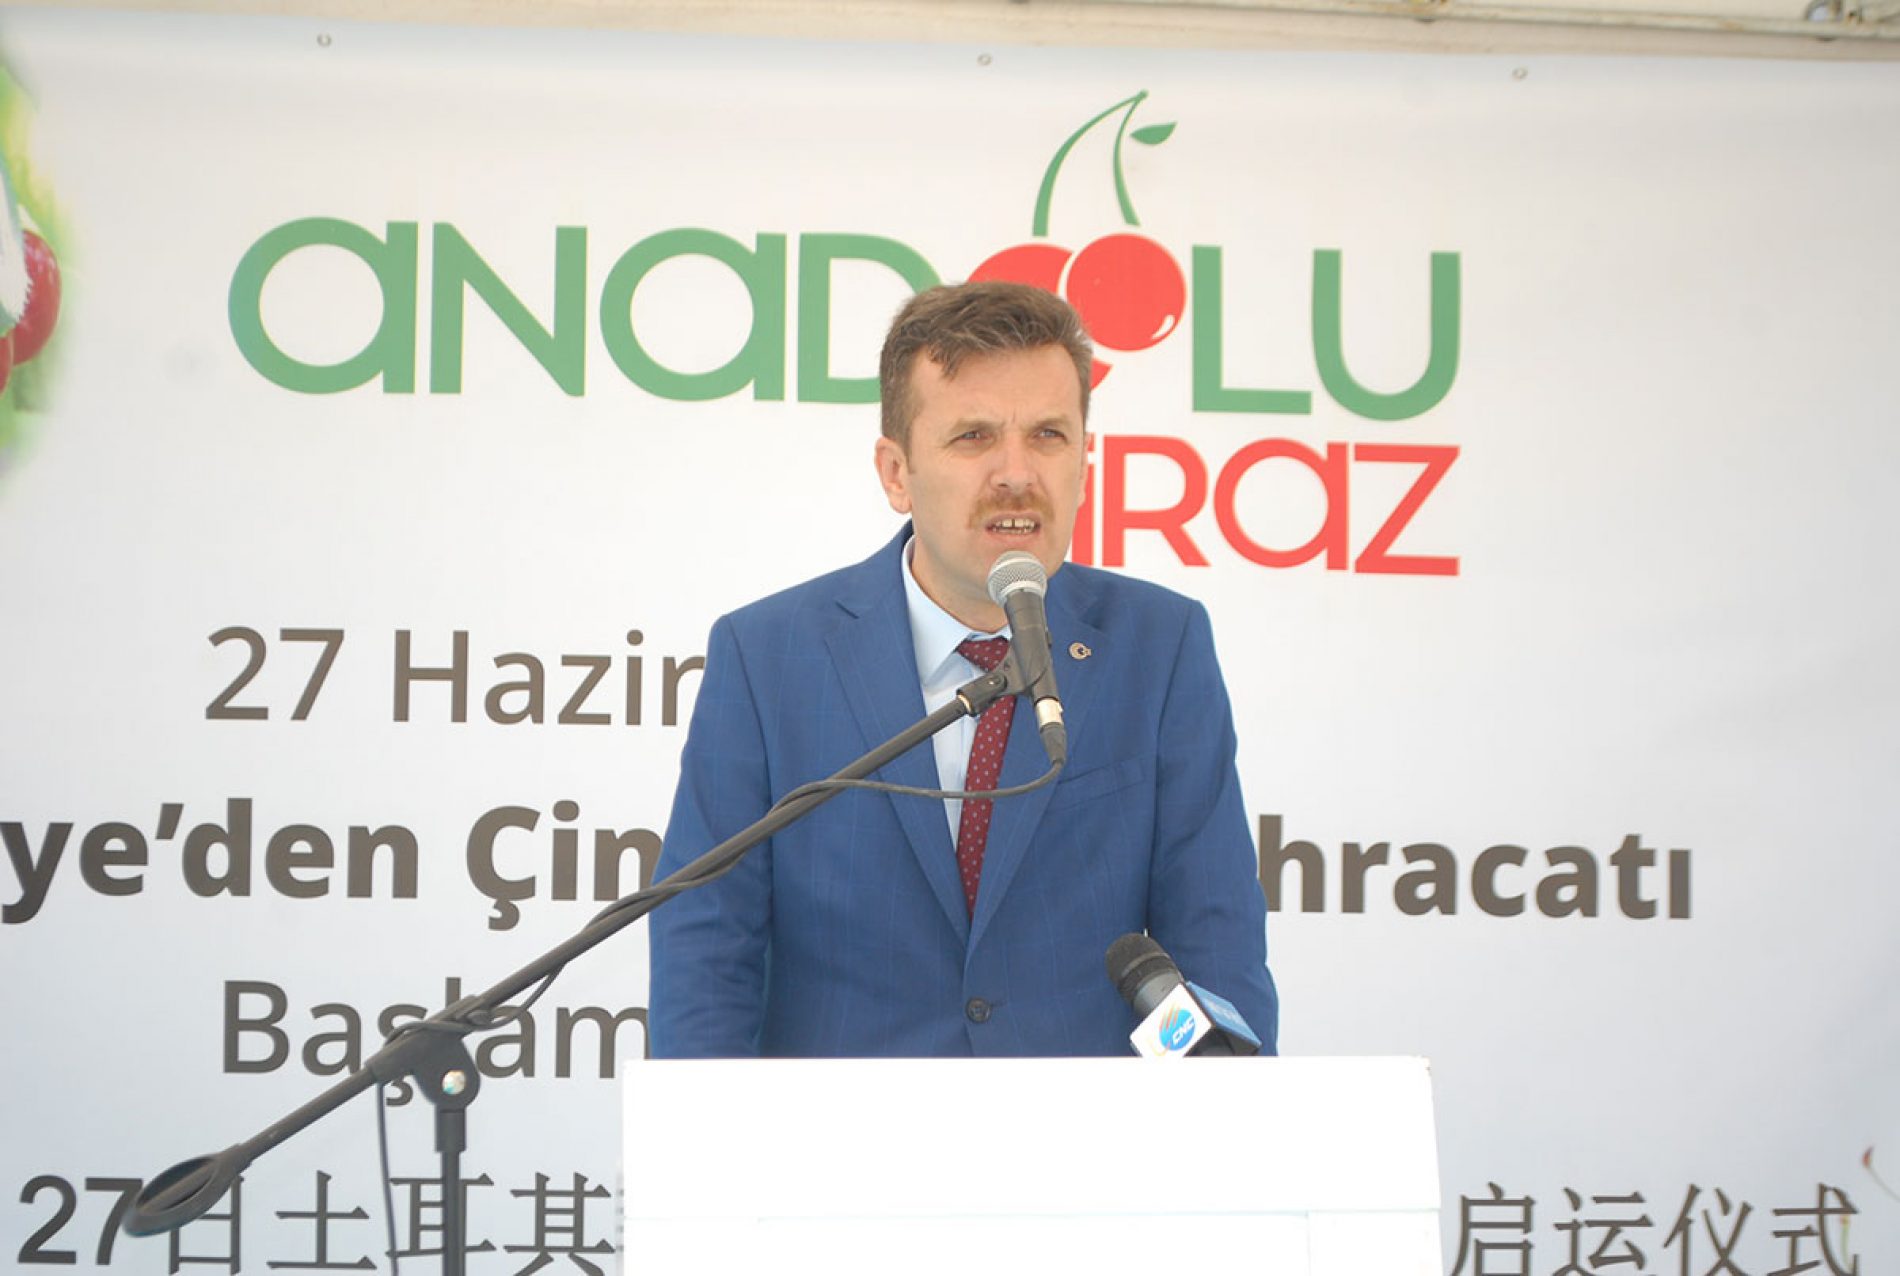 2019, CHERRIES ARE EXPORTED TO CHINA FROM TURKEY